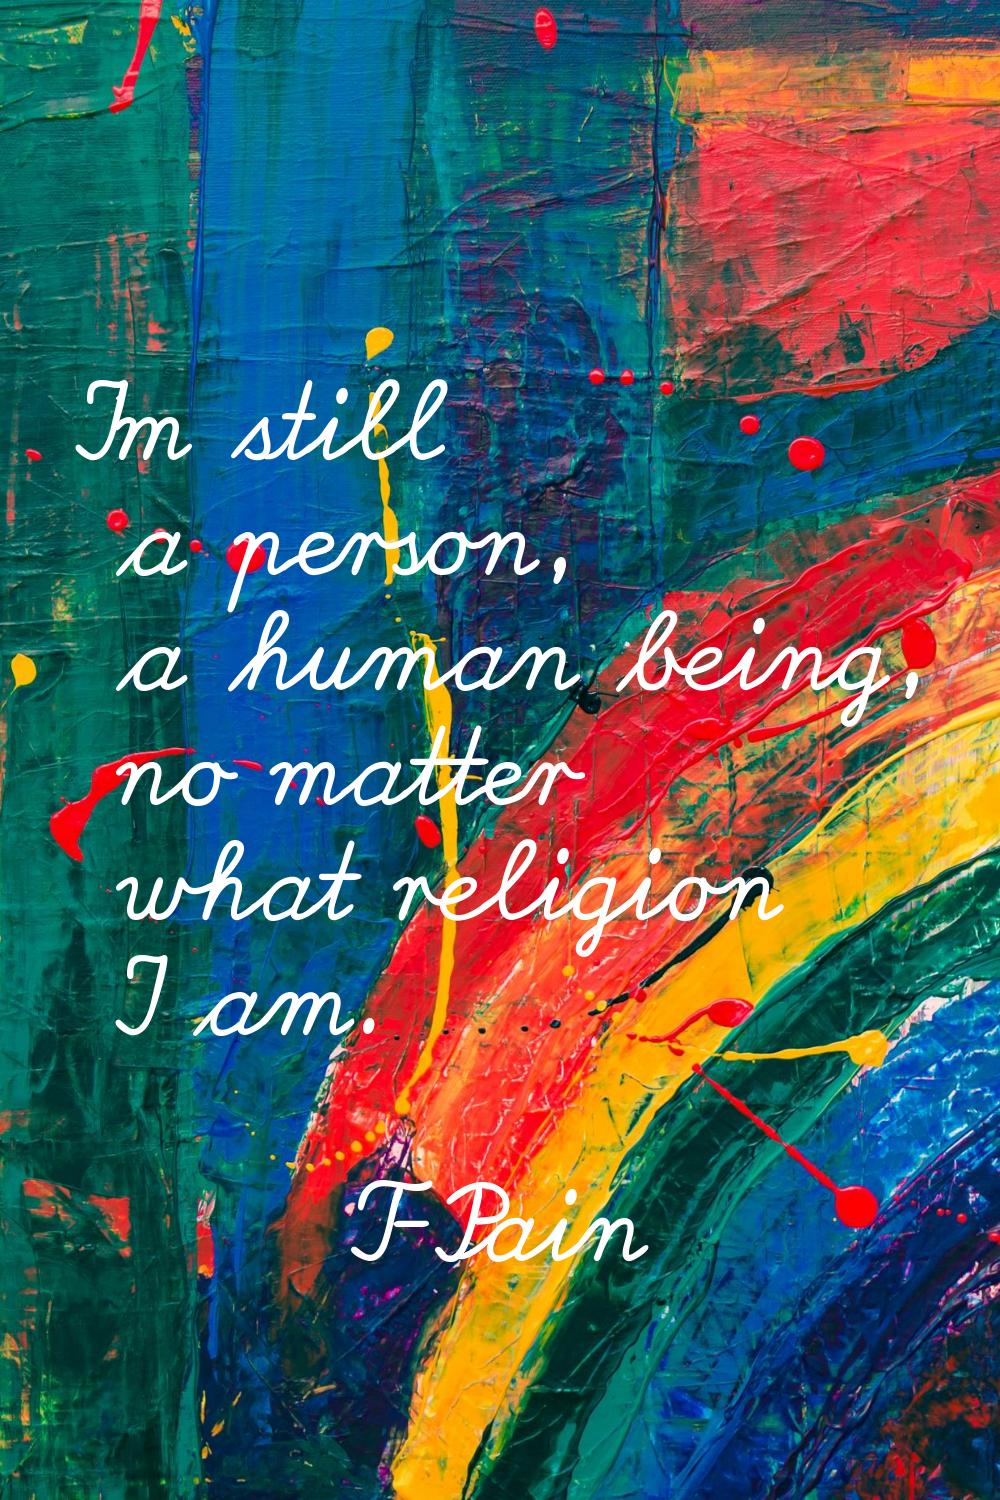 I'm still a person, a human being, no matter what religion I am.